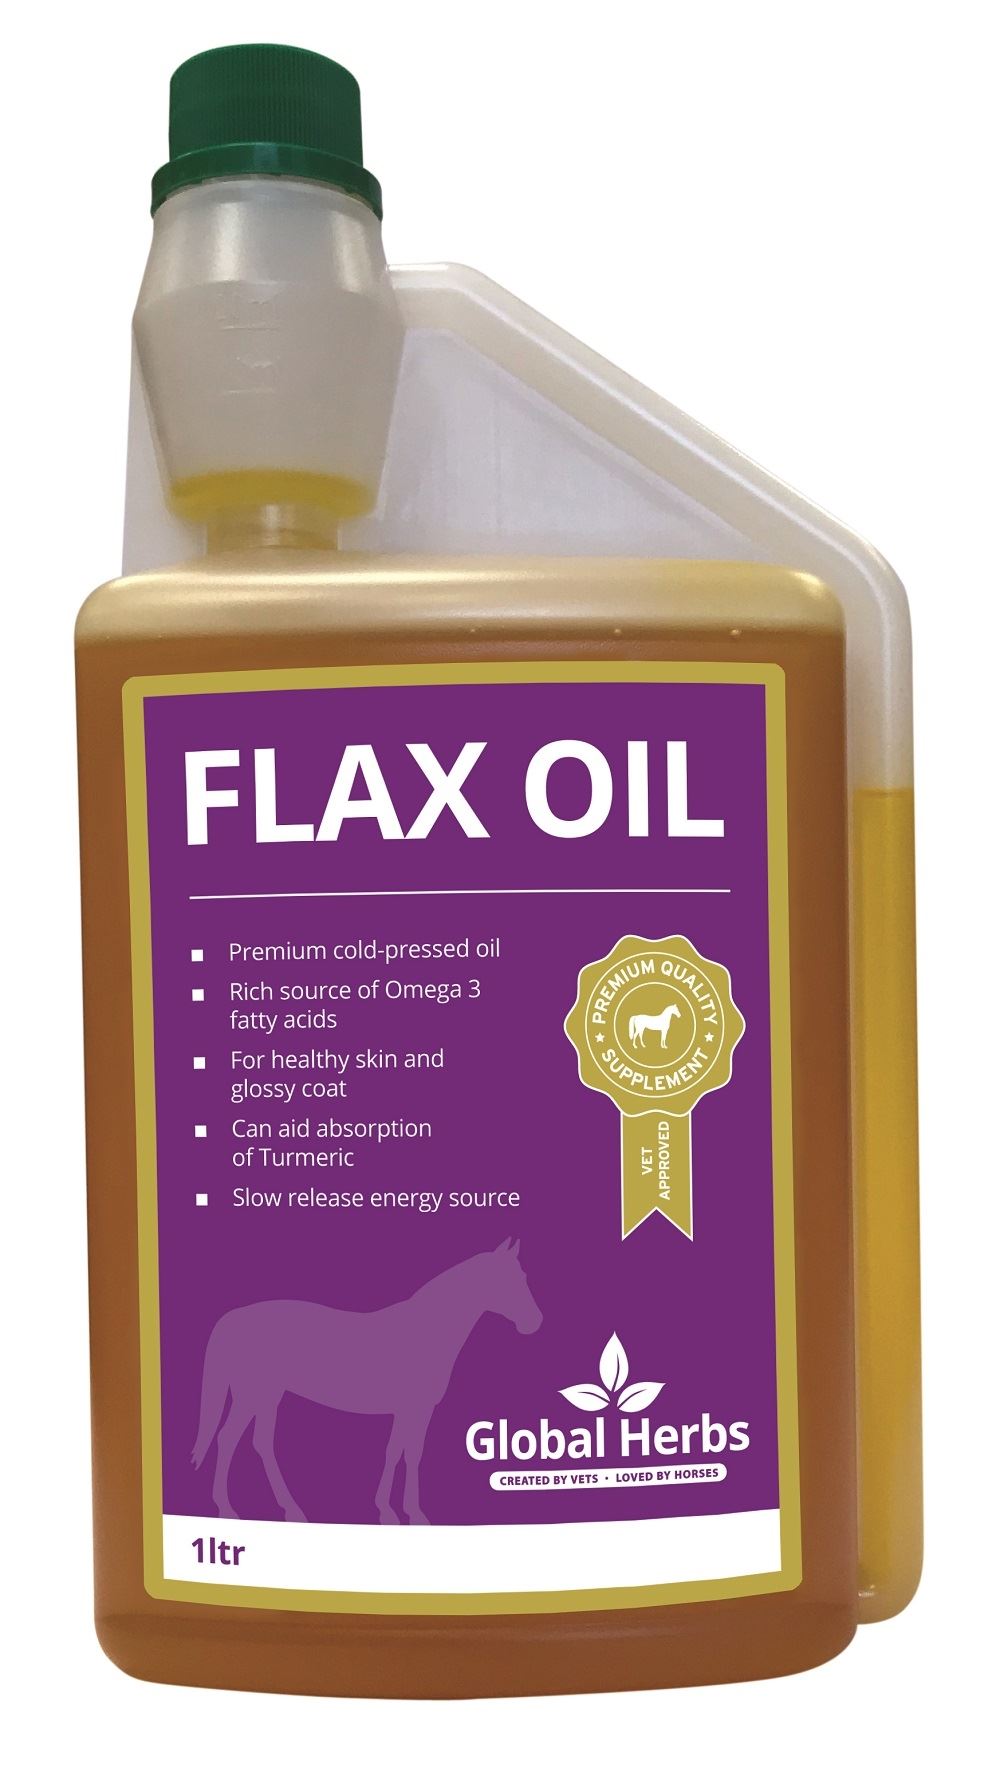 Global Herbs Flaxoil - Just Horse Riders